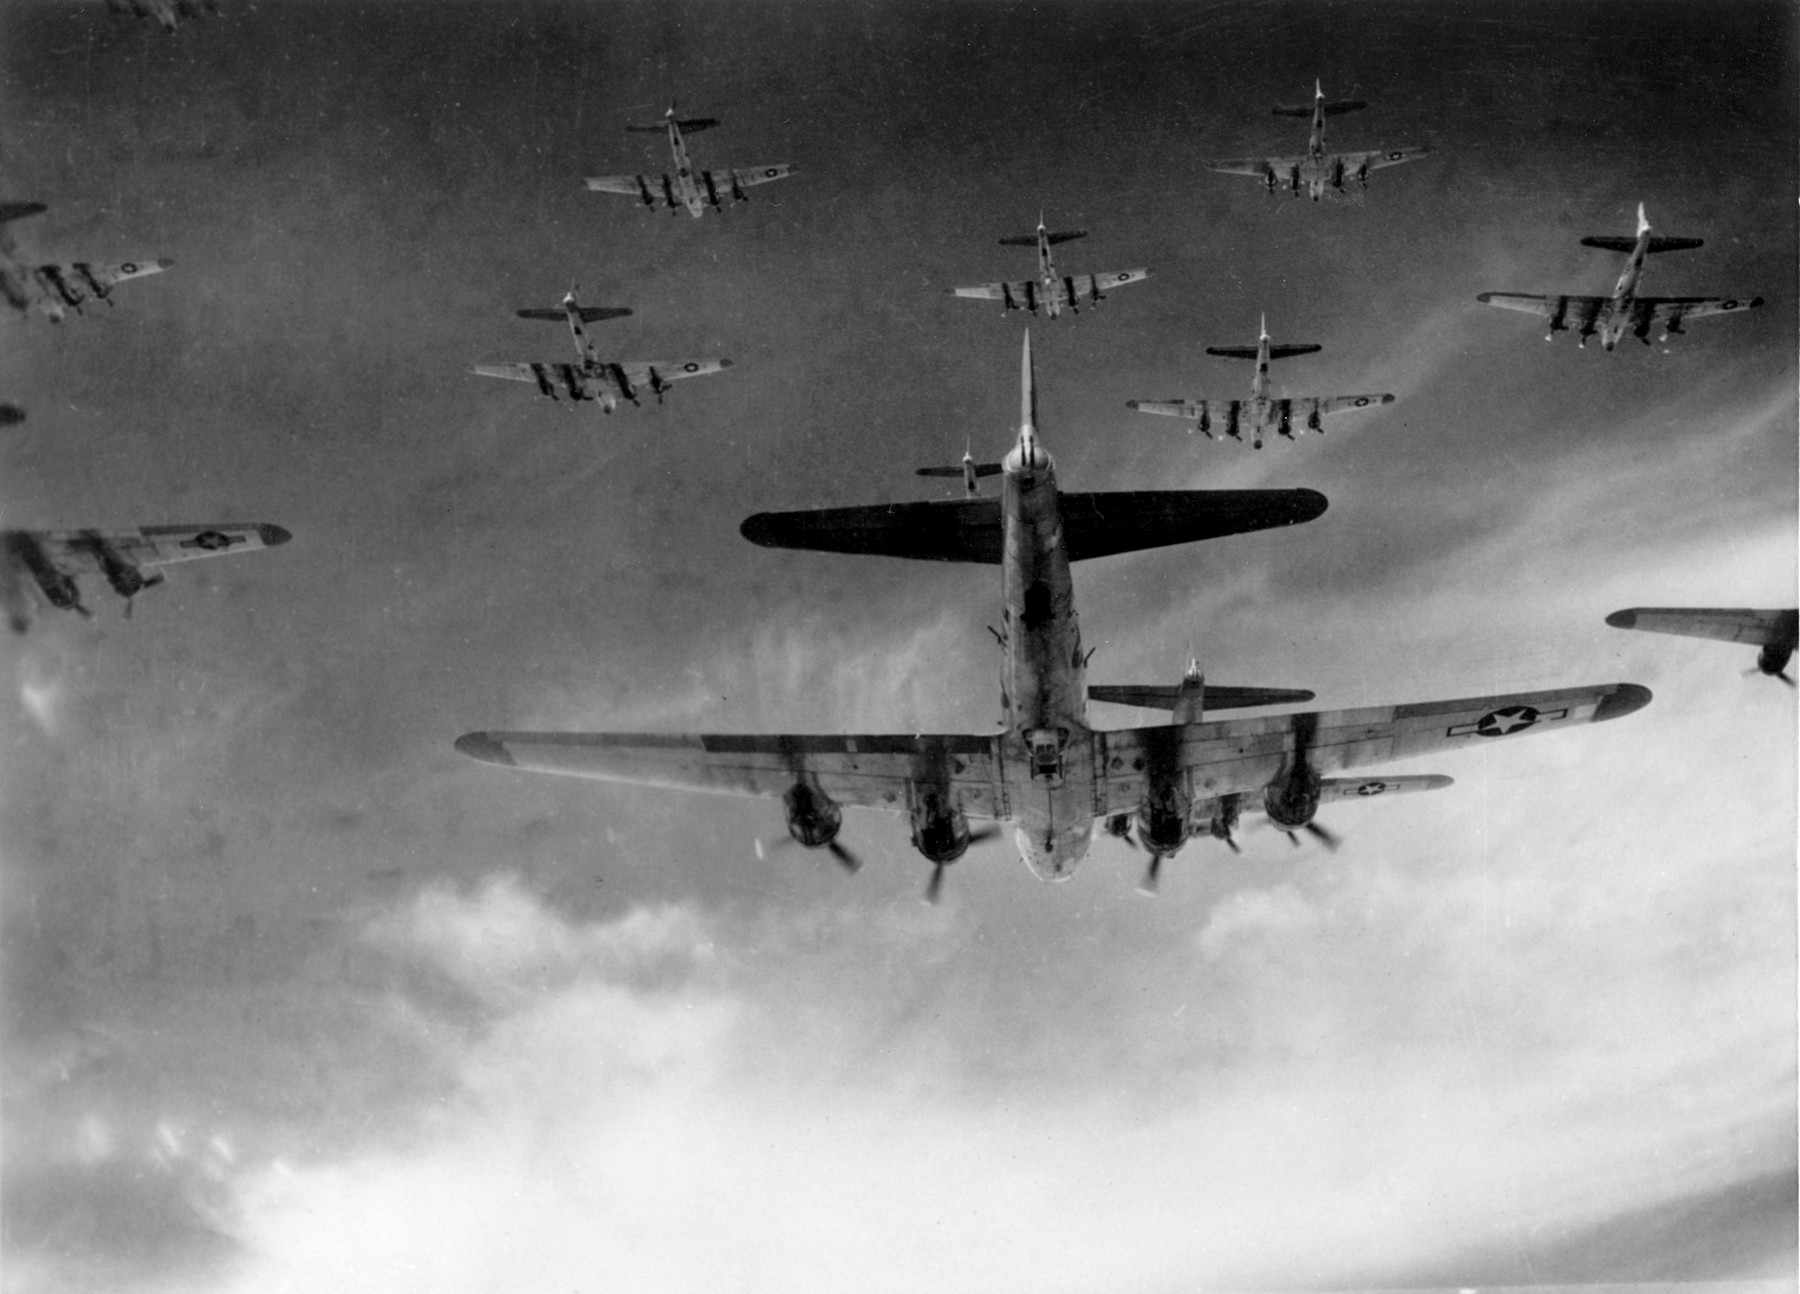 General 1800x1294 war World War II Boeing B-17 Flying Fortress military aircraft US Air Force history Bomber aircraft Formation low-angle American aircraft flying vehicle monochrome